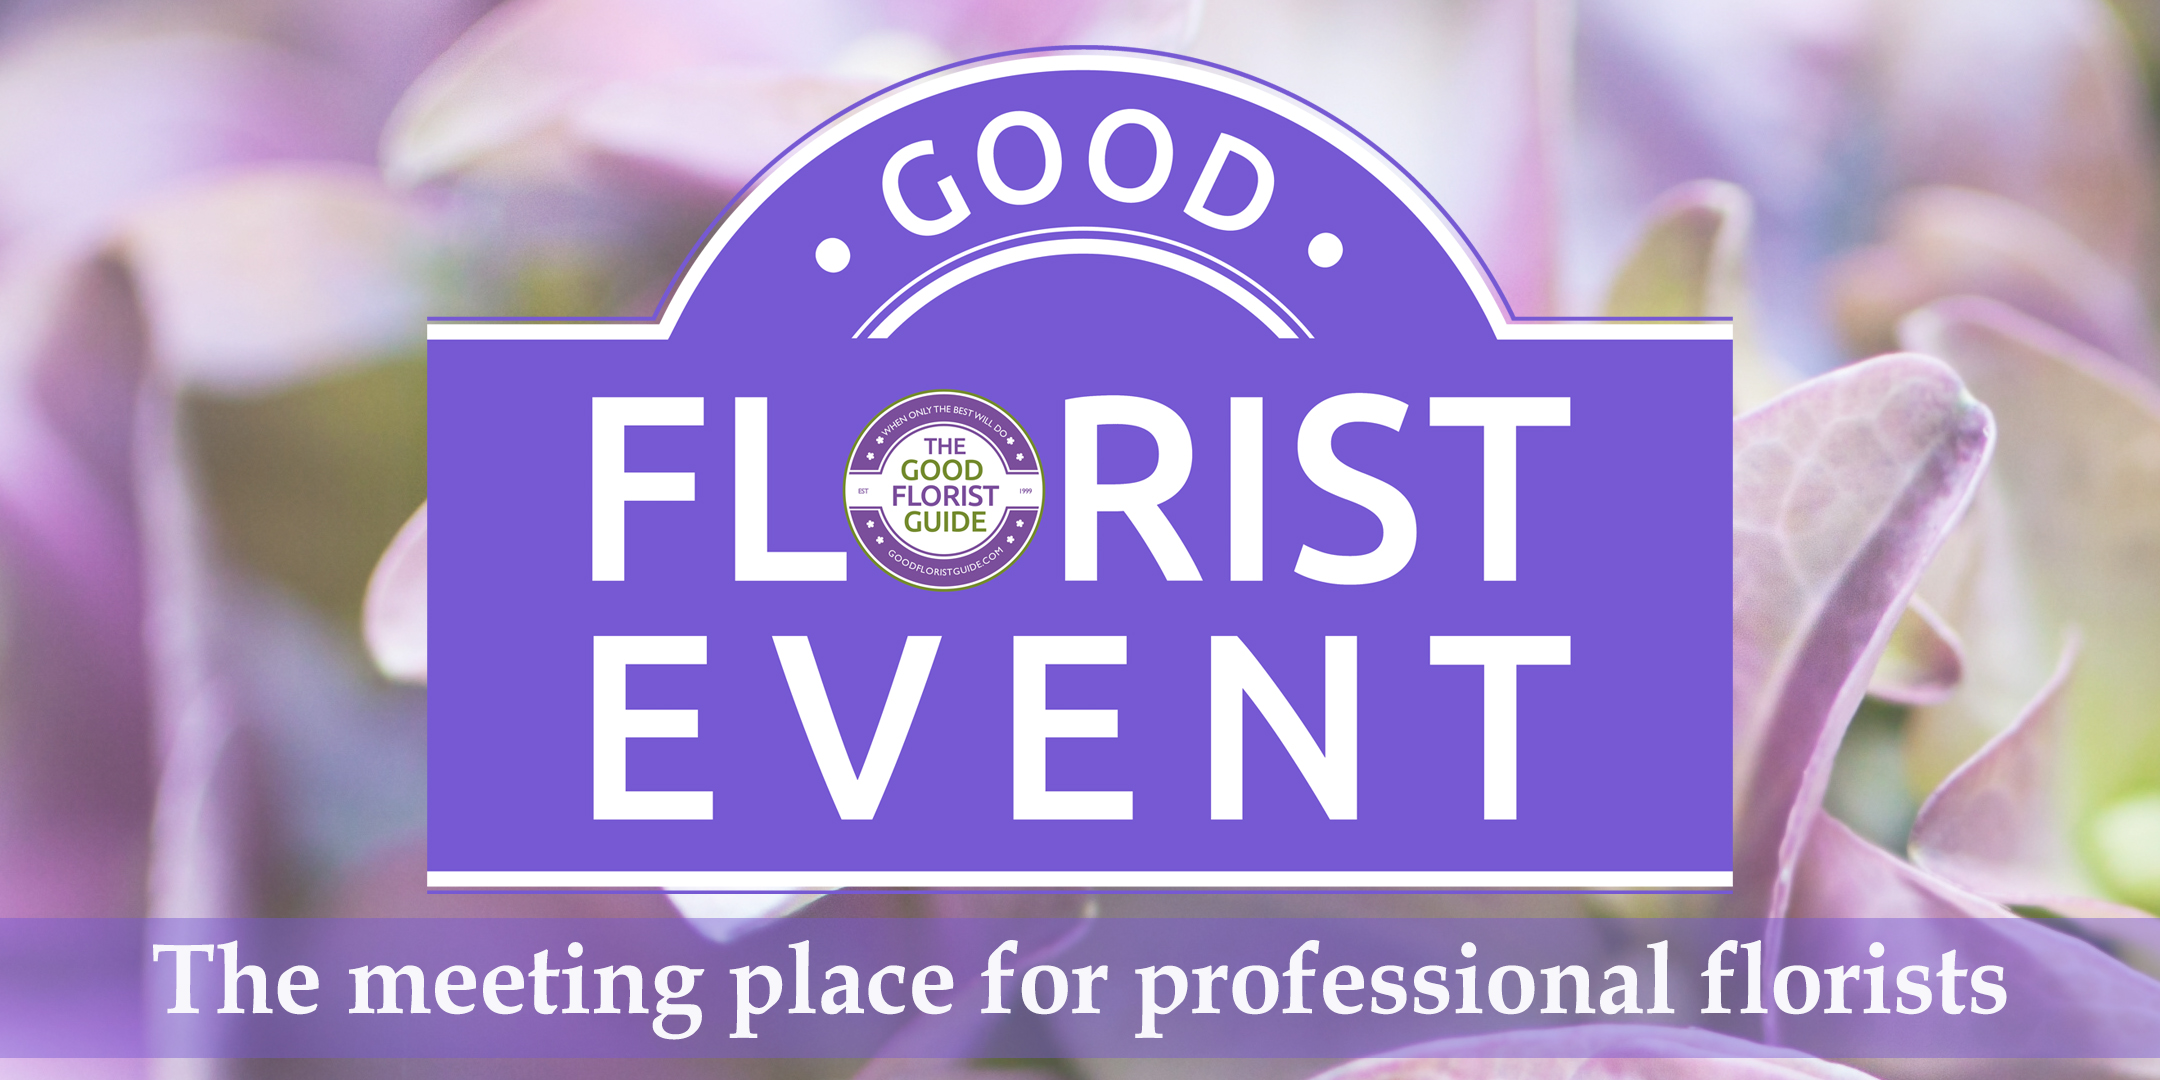 Good Florist Event - Tickets now on sale